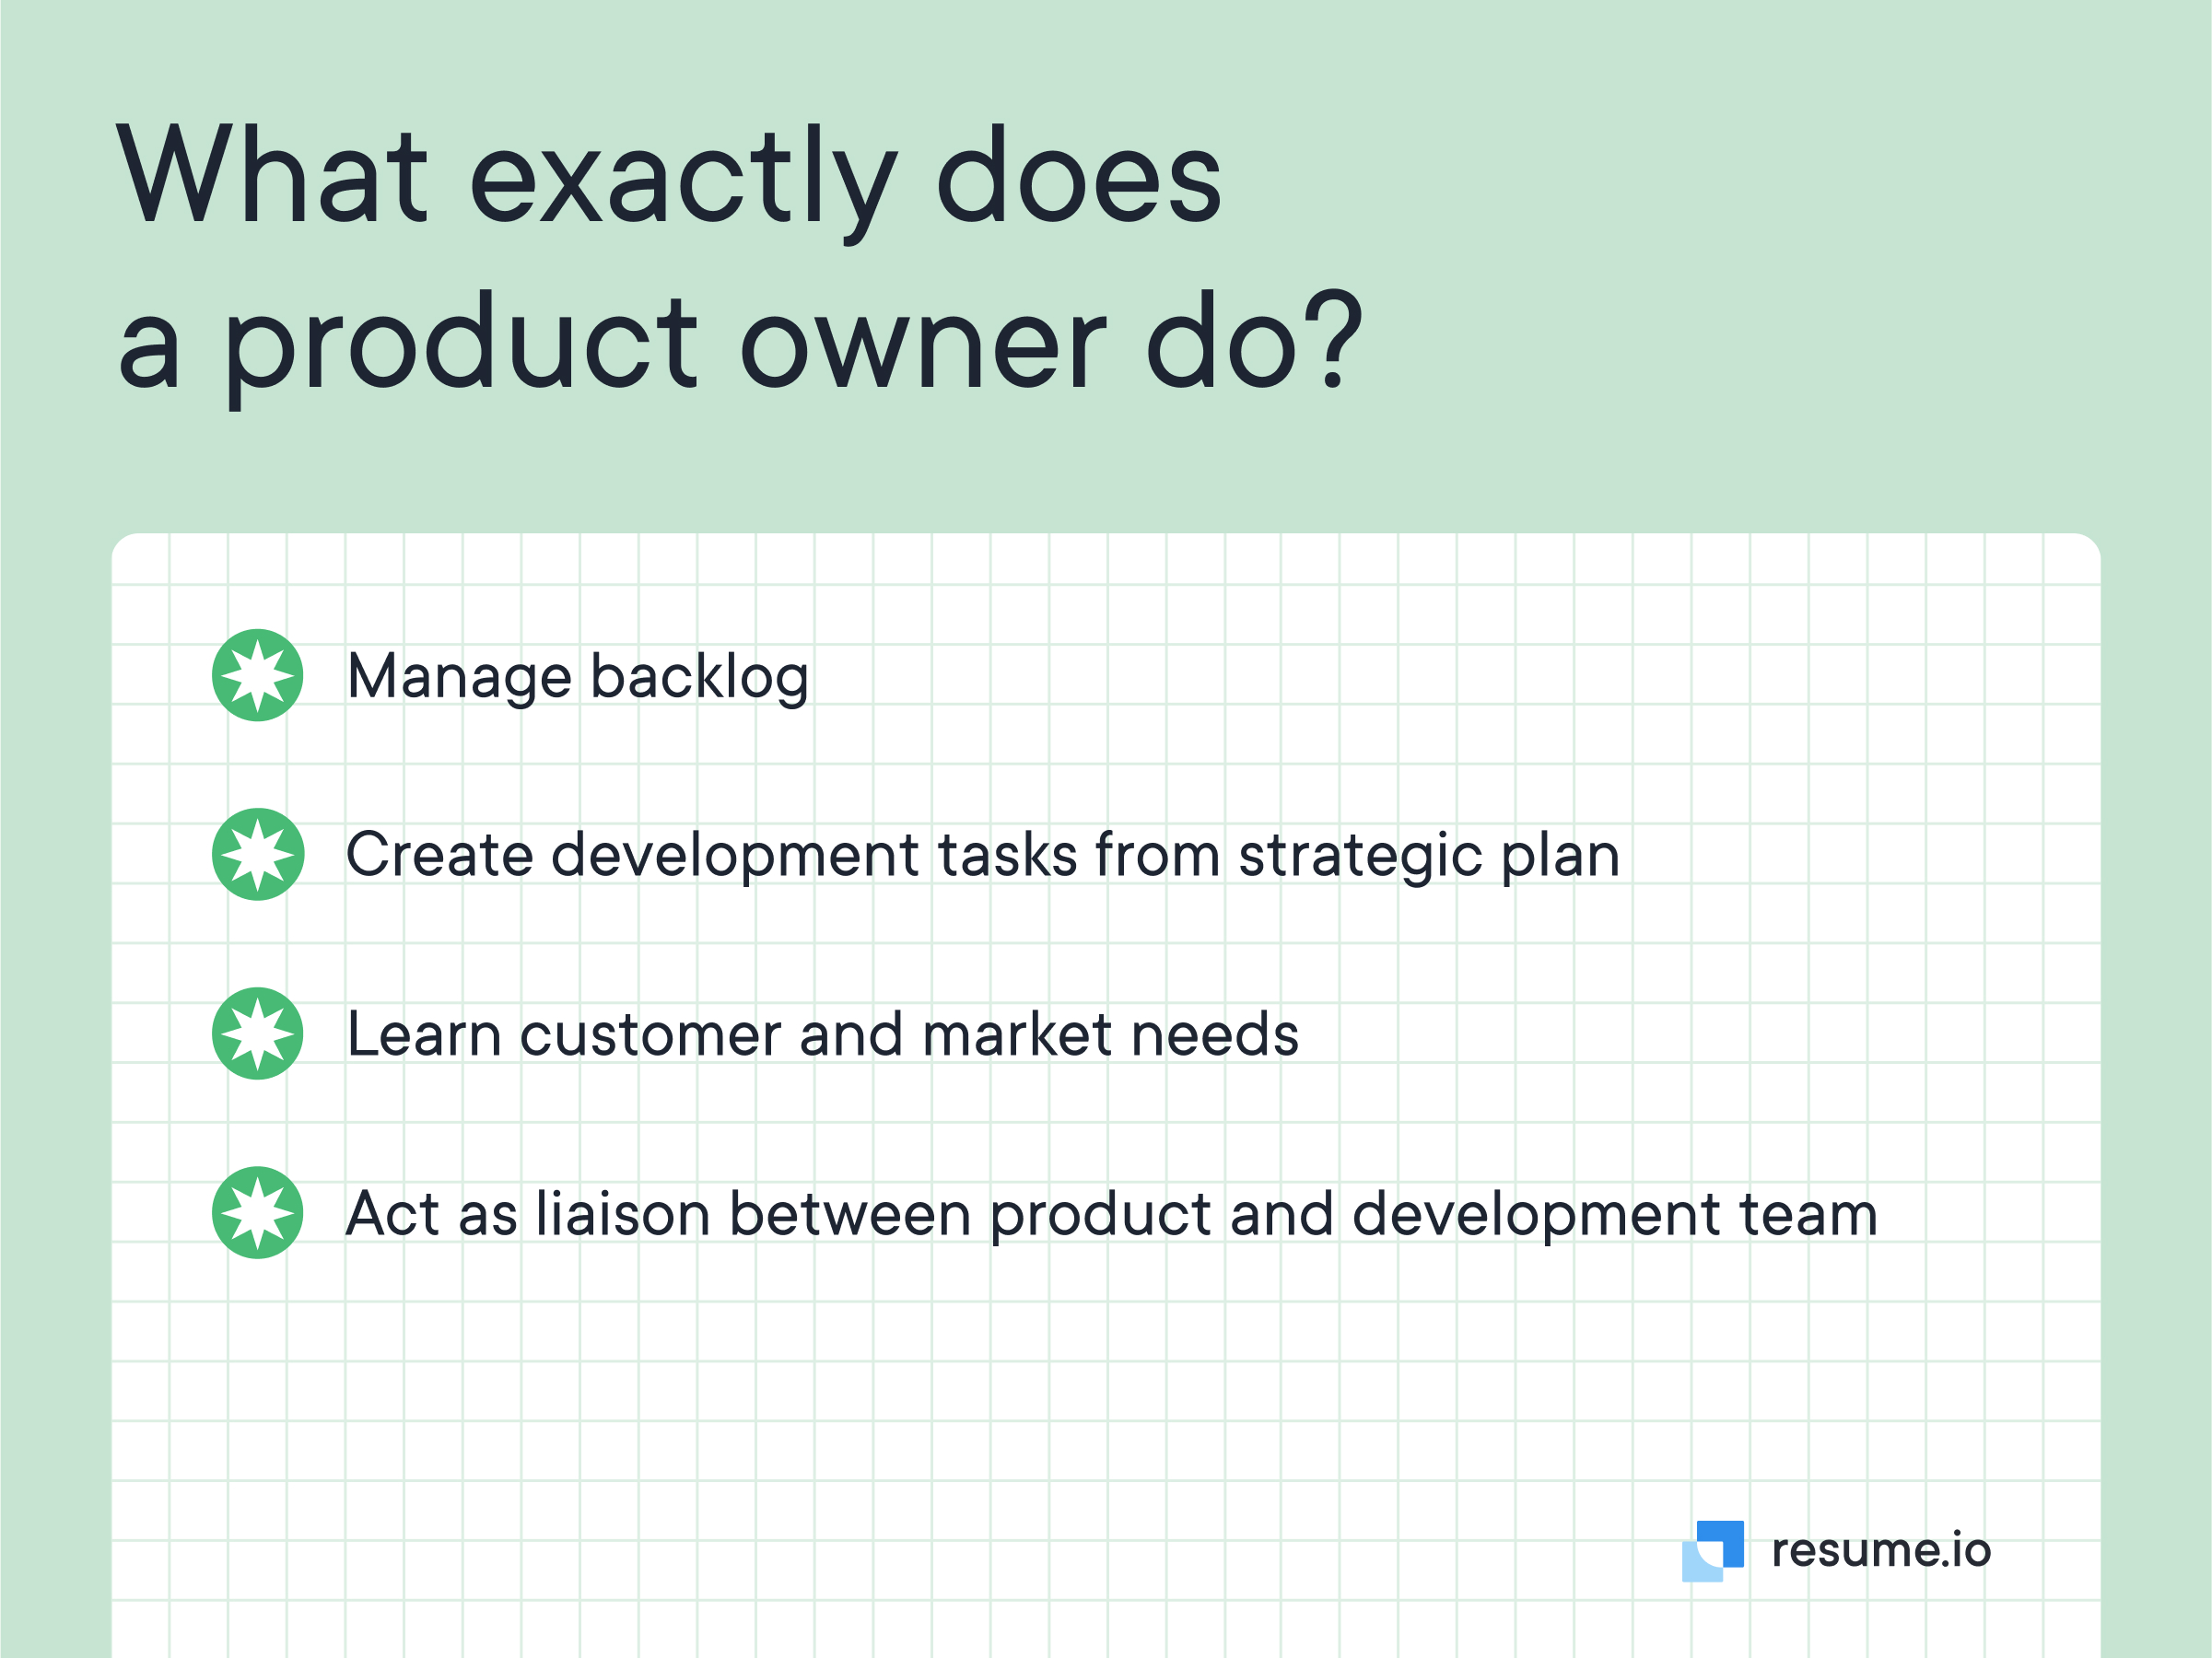 A product owner does multiple things for work